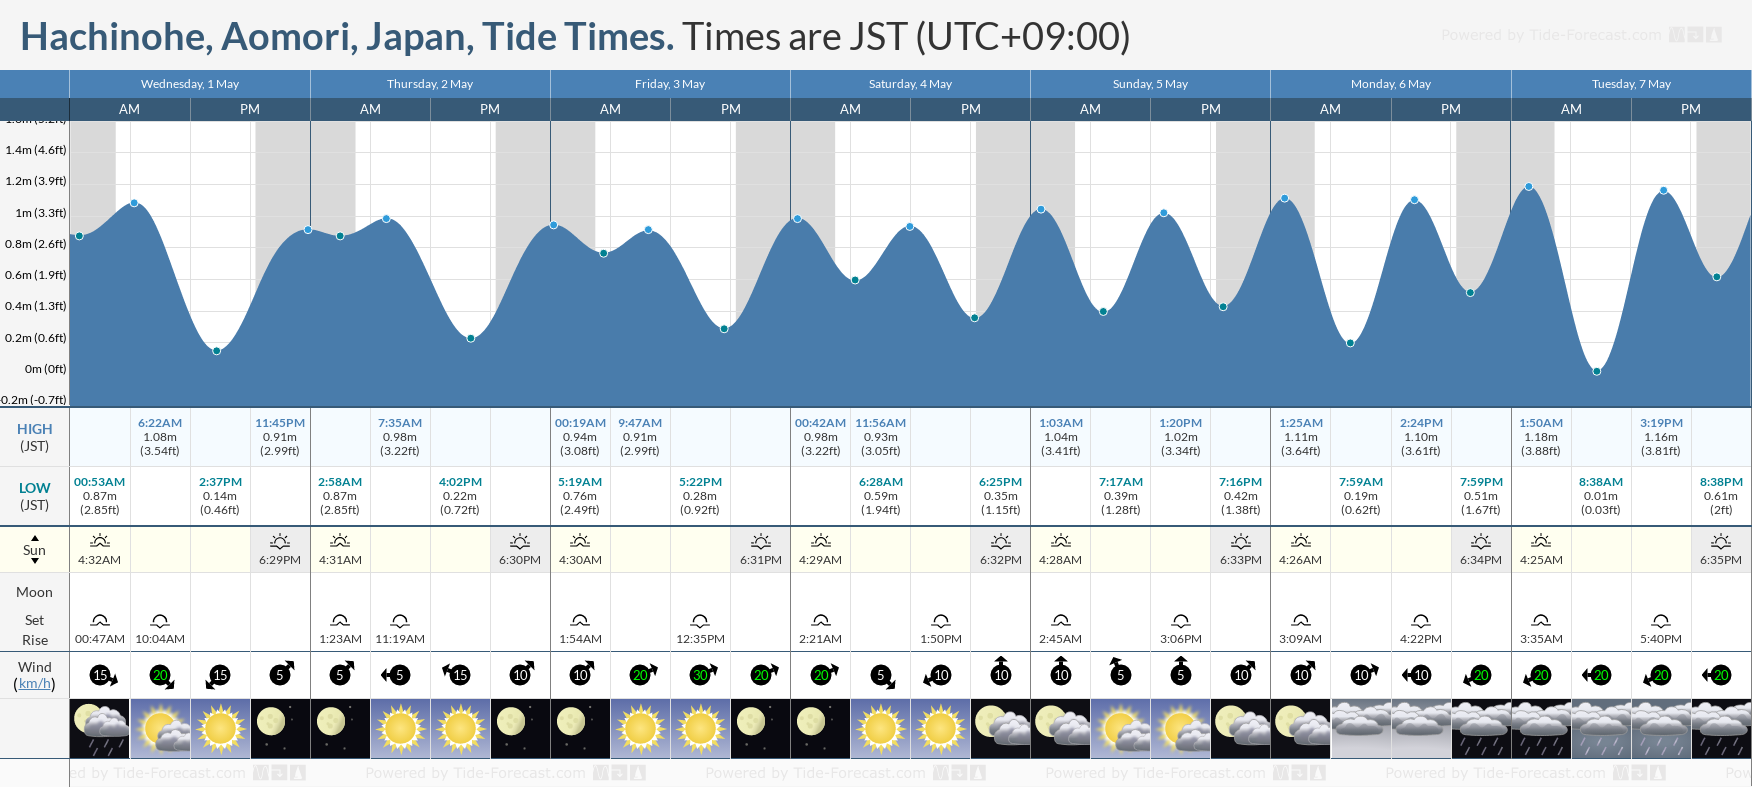 Hachinohe, Aomori, Japan Tide Chart including high and low tide tide times for the next 7 days